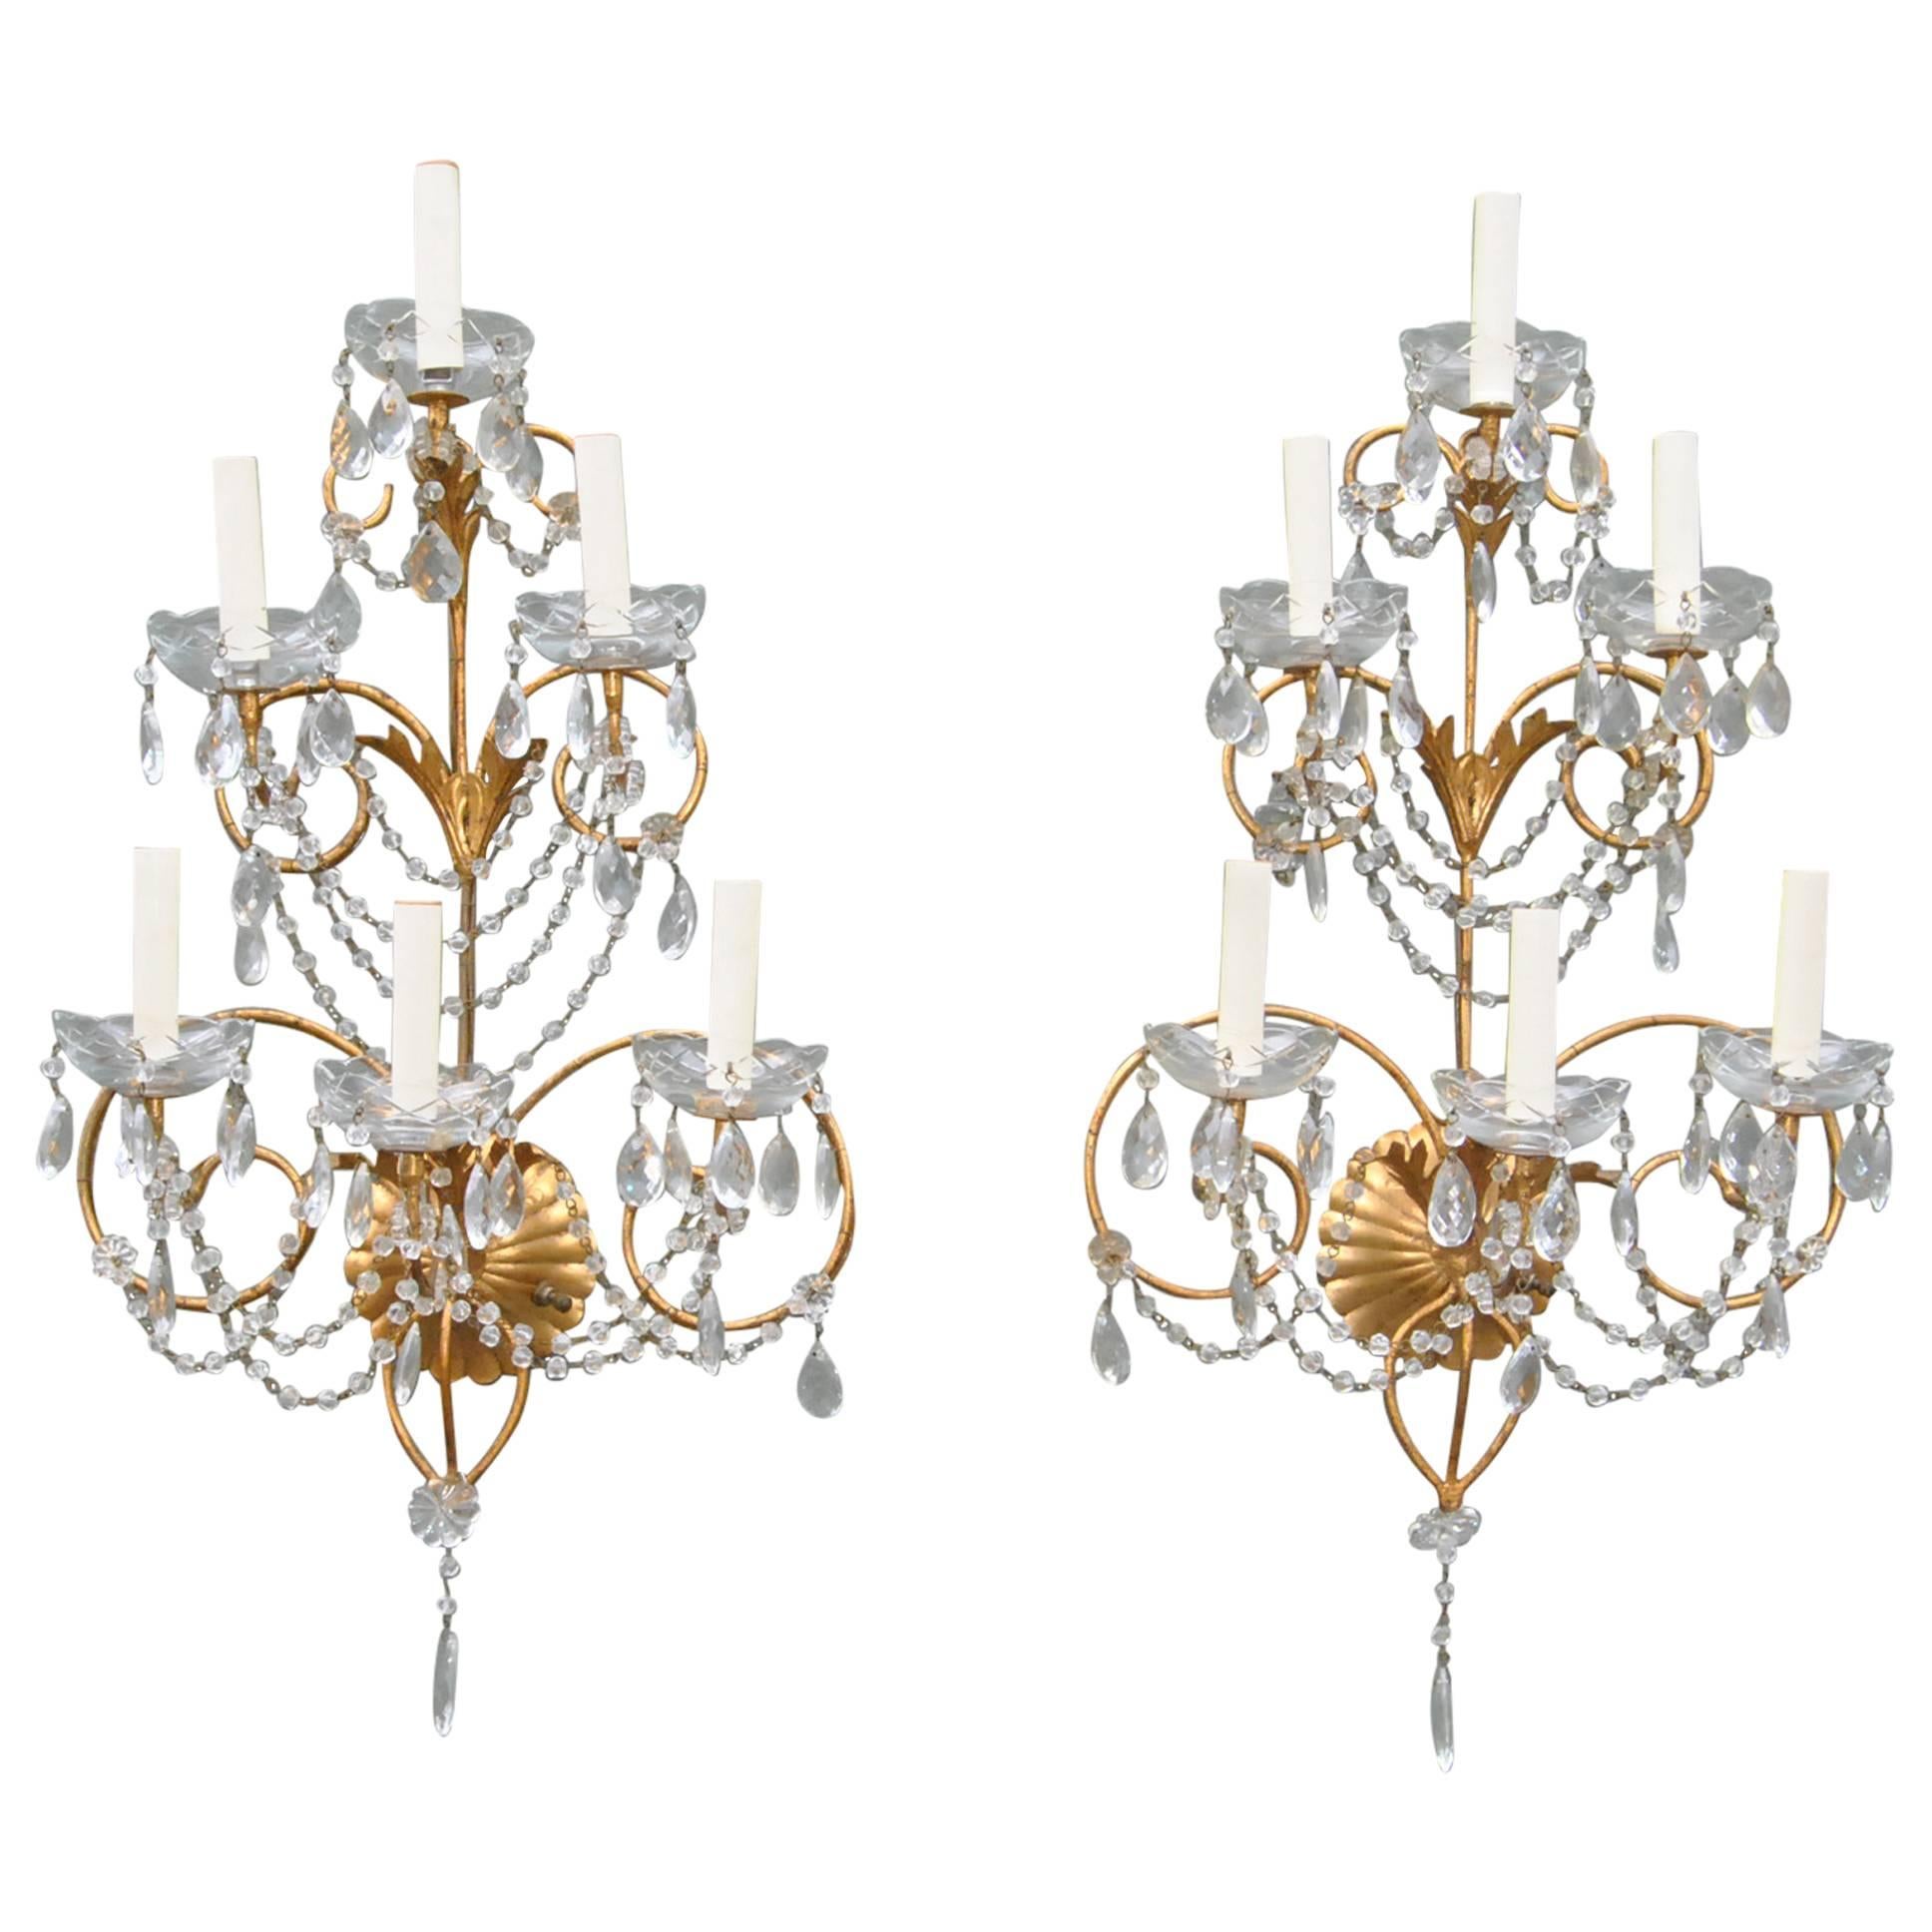 Pair of Italian Maria Theresa Style Crystal and Gold Wall Sconces